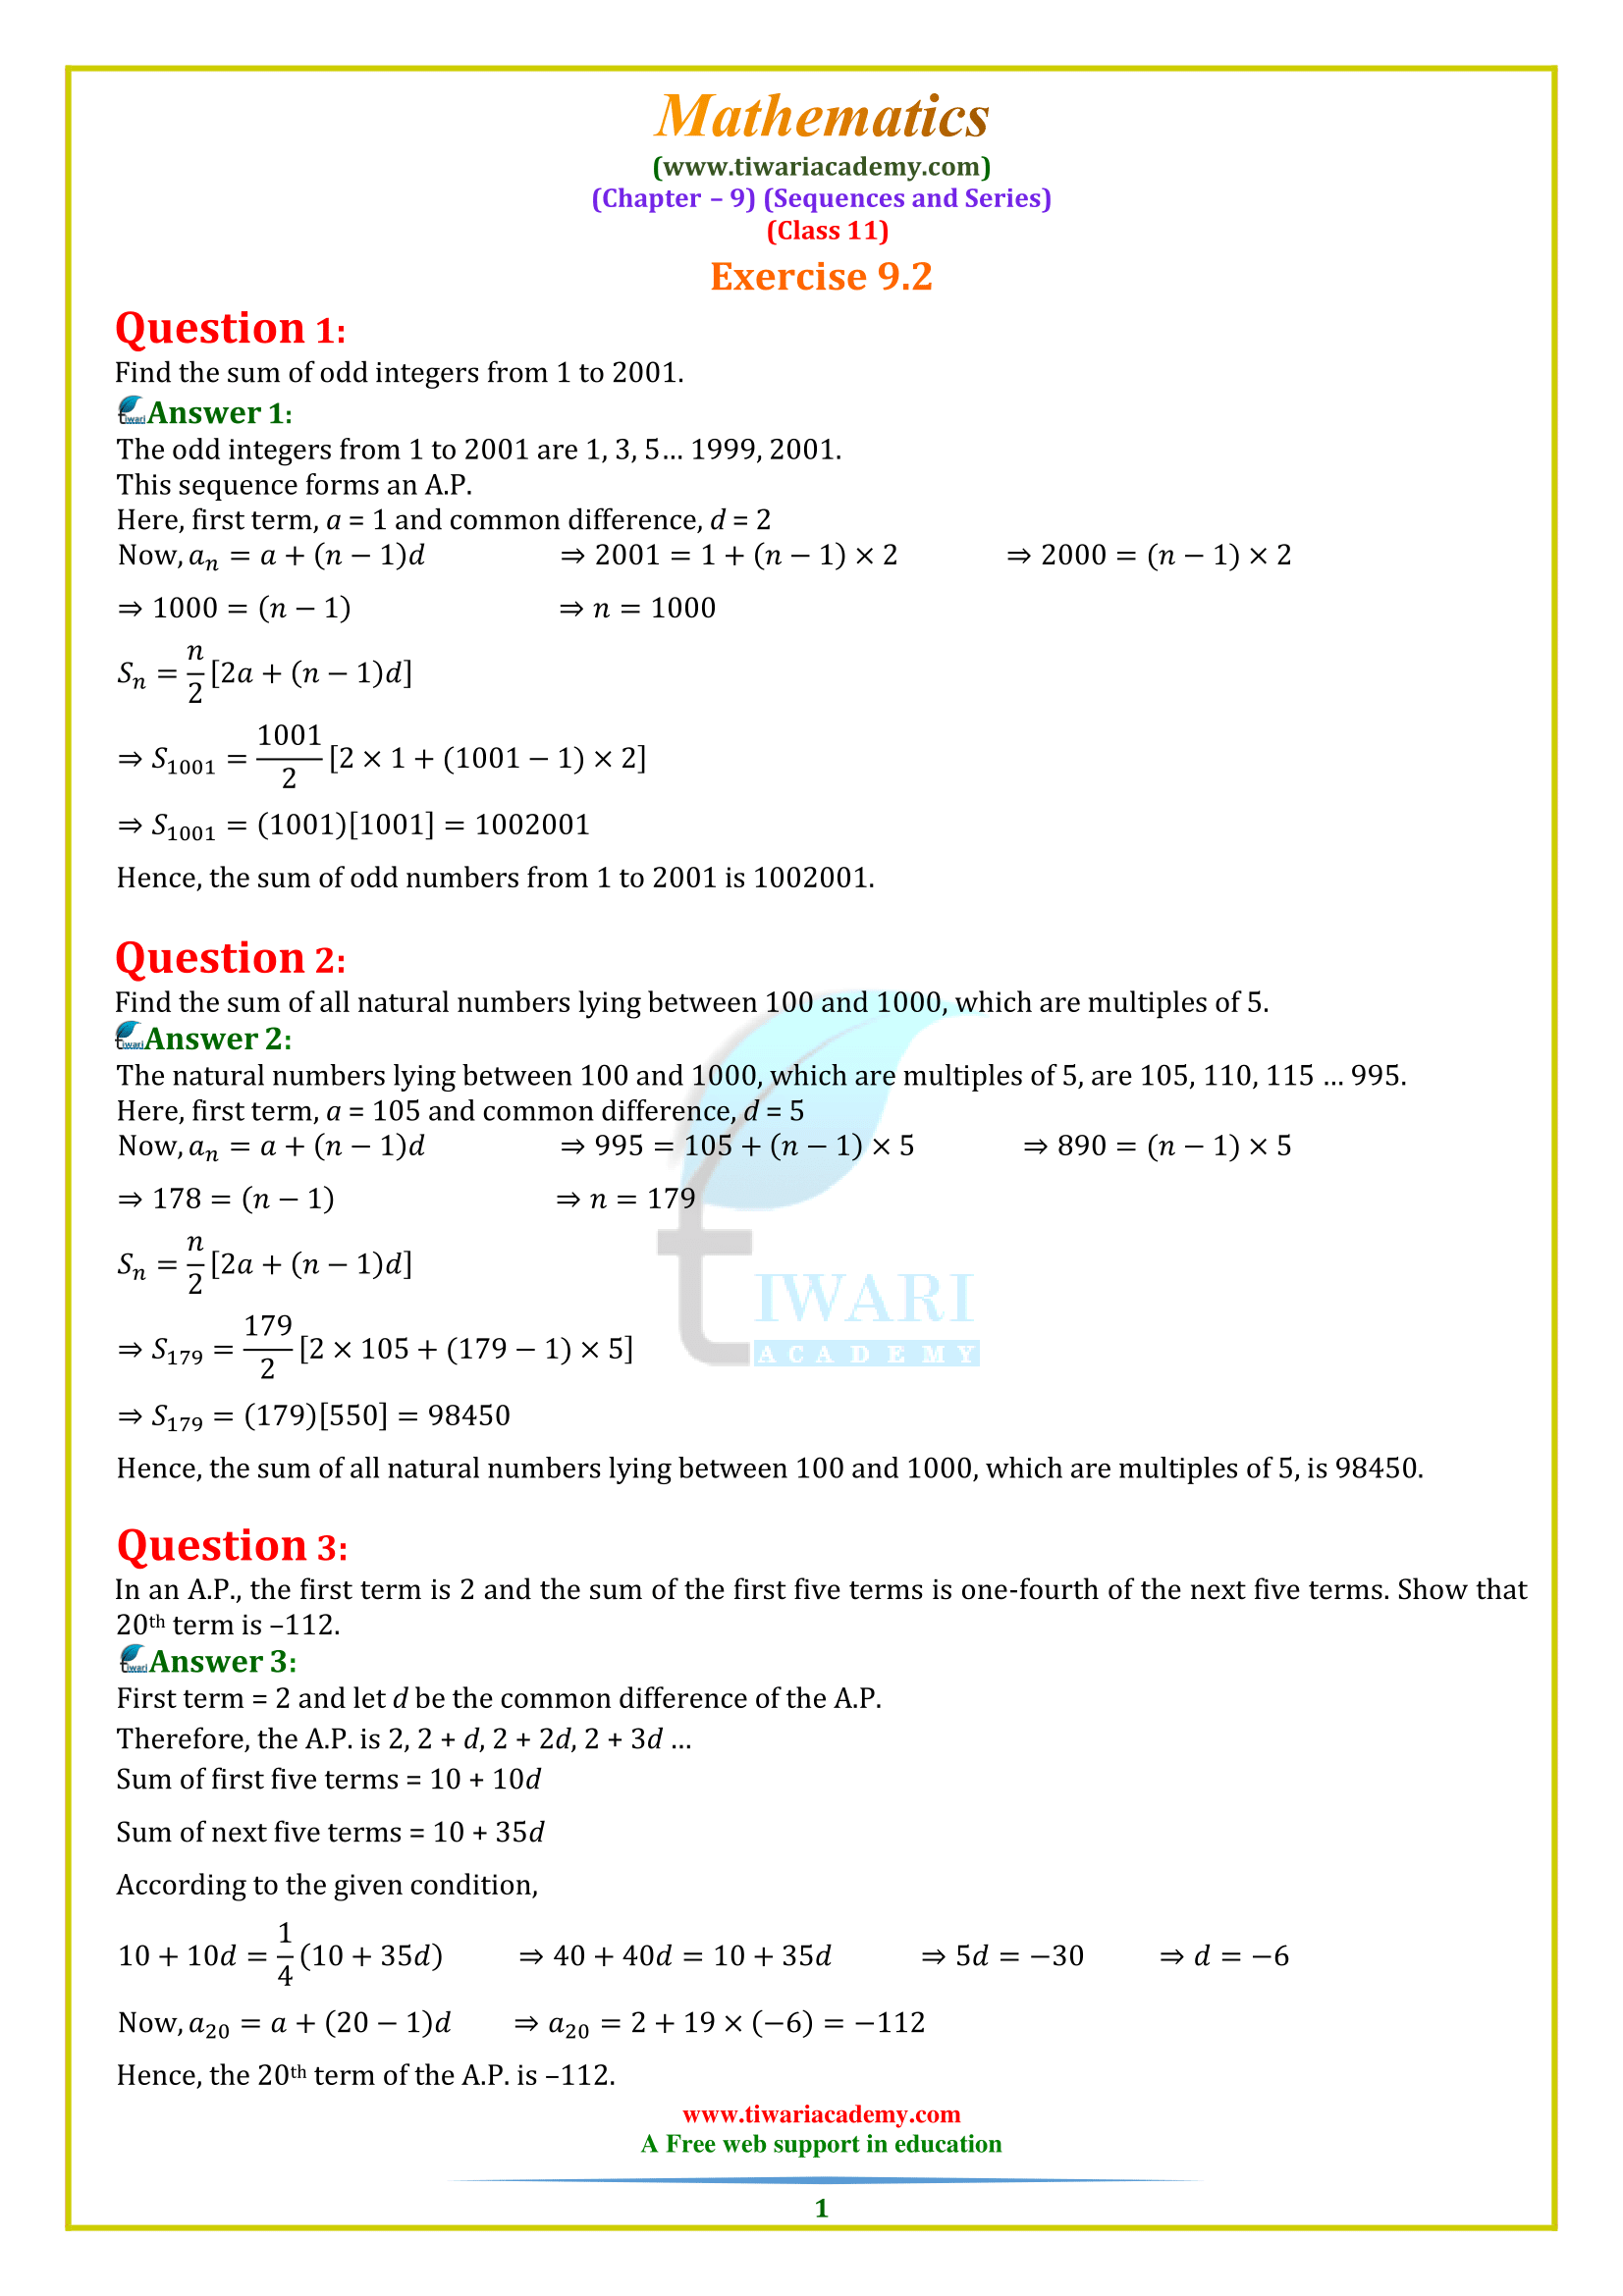 Class 11 Maths Chapter 9 Sequences and Series Exercise 9.2